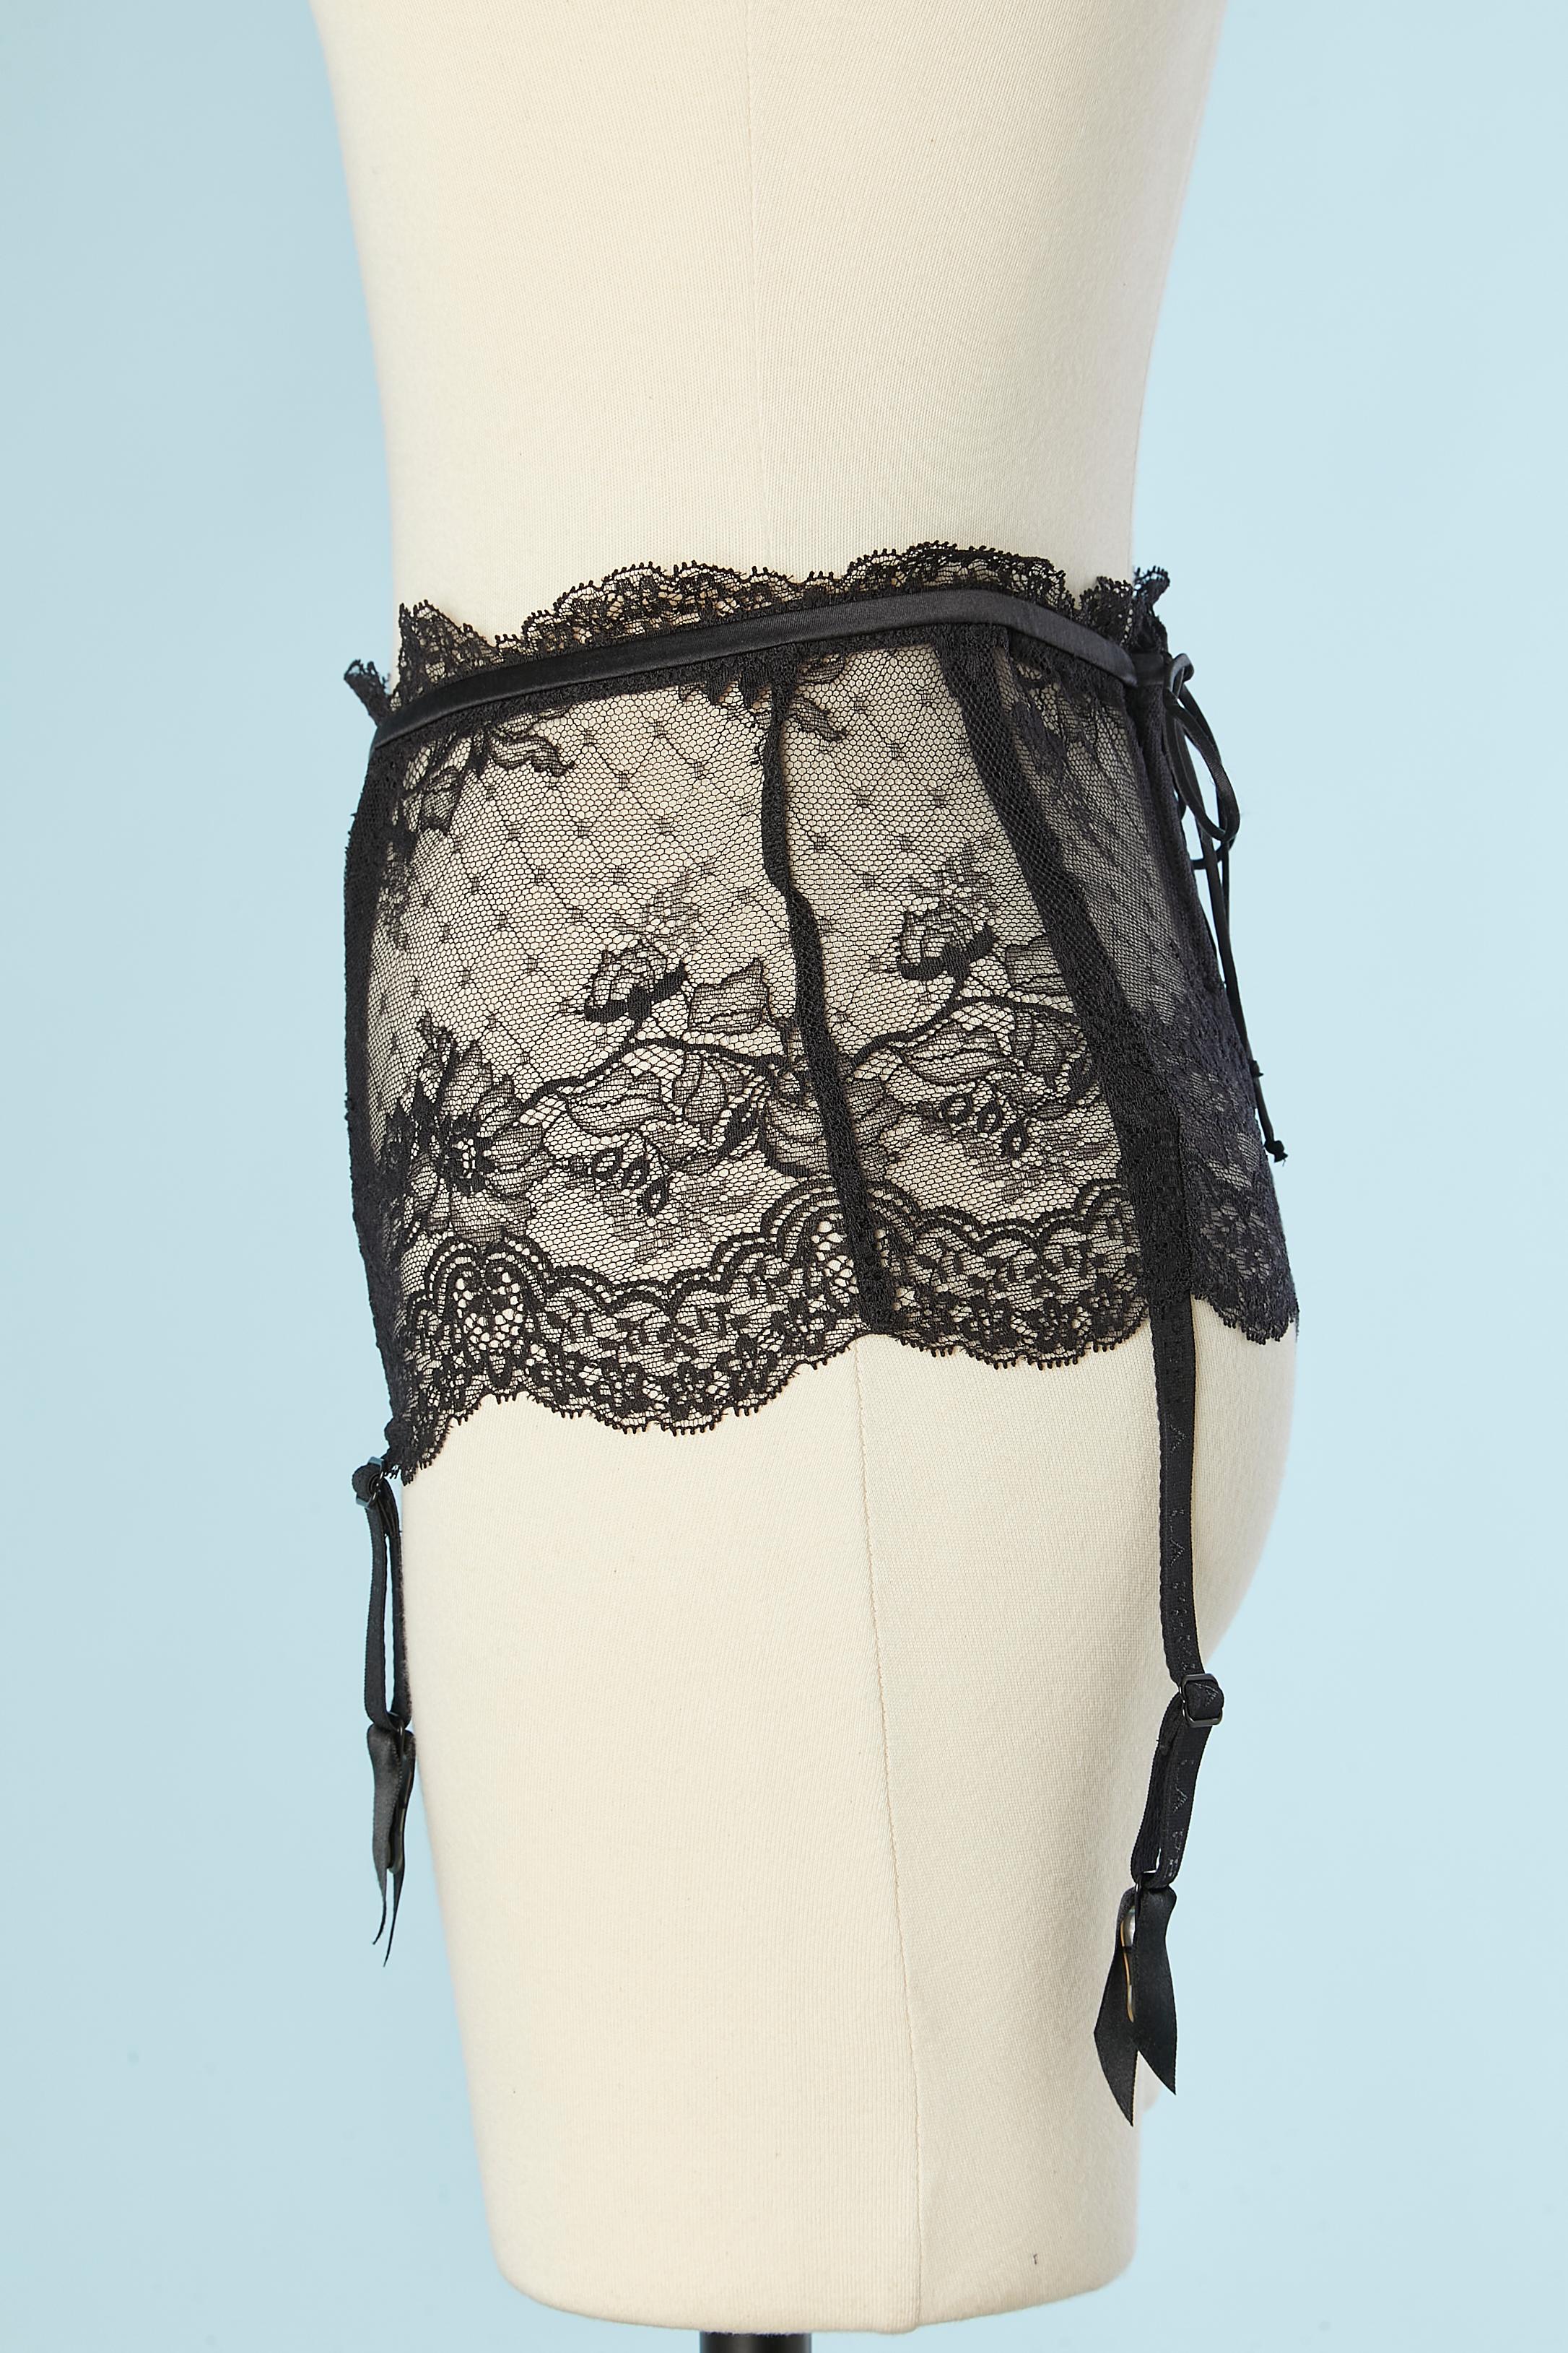 Black lace panties with garter belt and laces in the back La Perla  In Excellent Condition For Sale In Saint-Ouen-Sur-Seine, FR